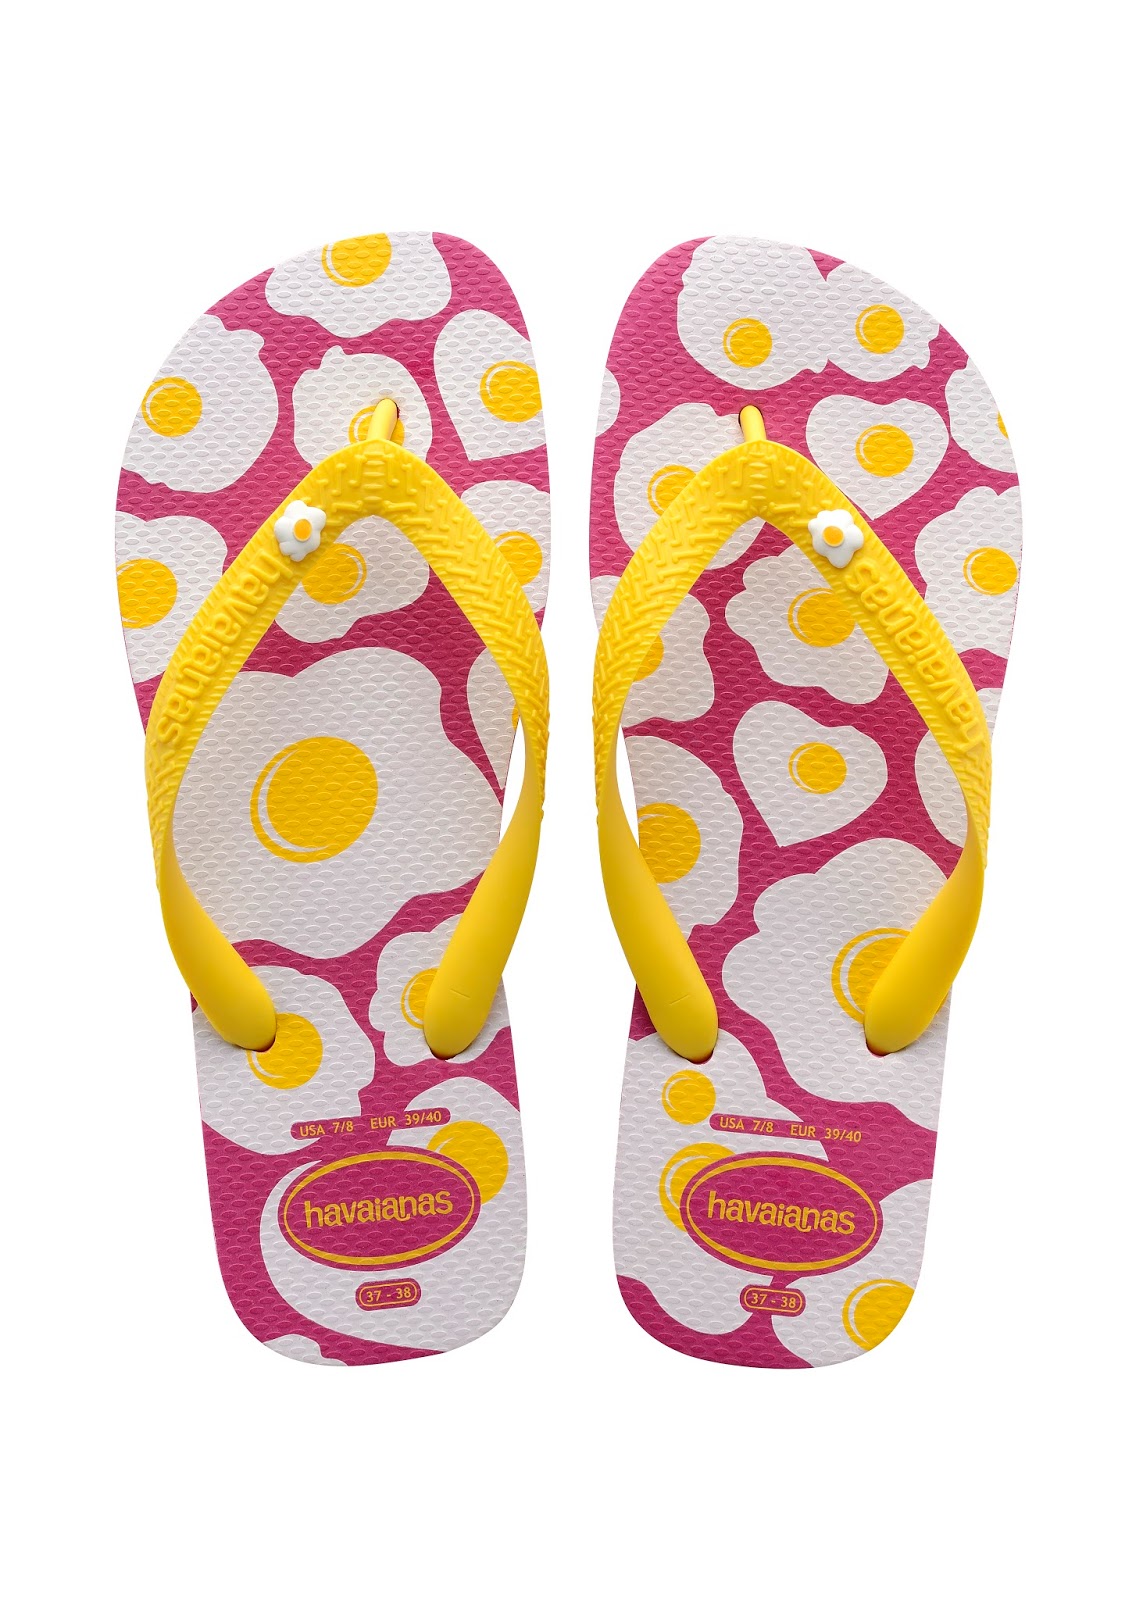 Why Not by Leah Puyat: Feel the summer fun with new Havaianas flip-flops!